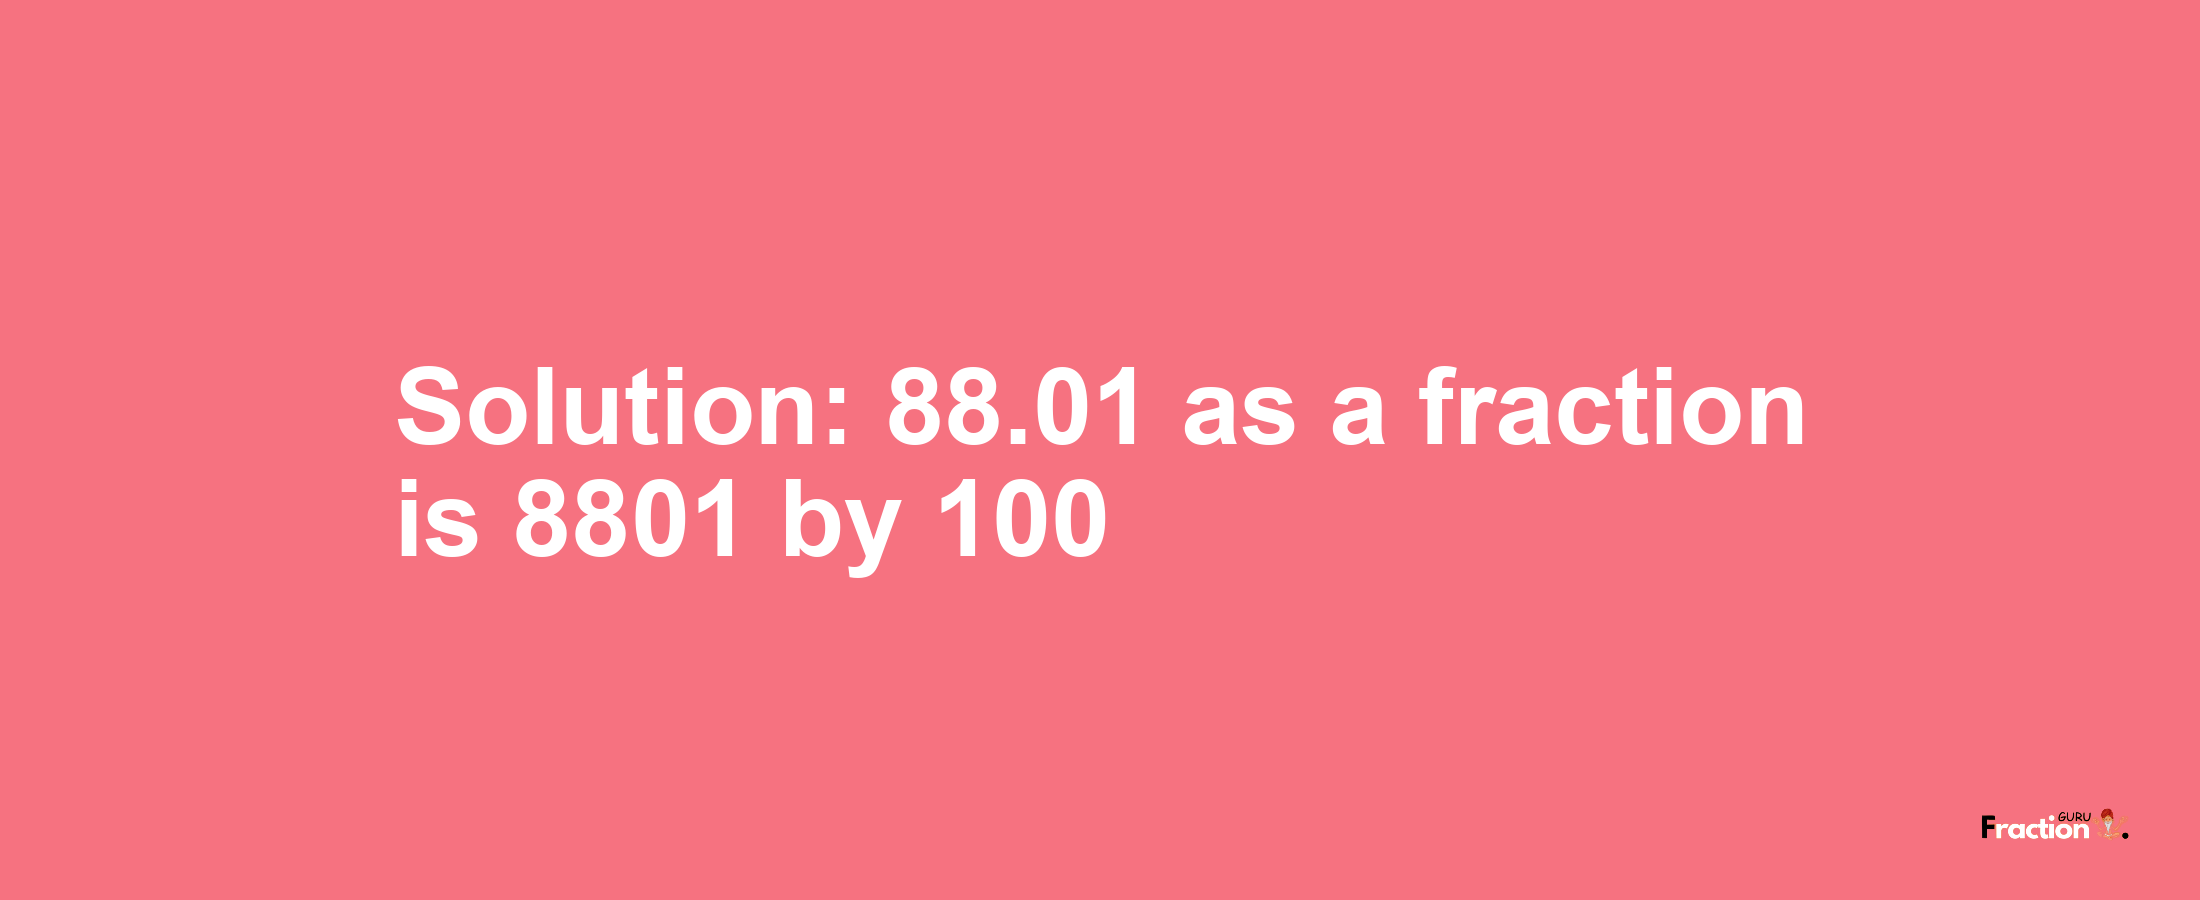 Solution:88.01 as a fraction is 8801/100